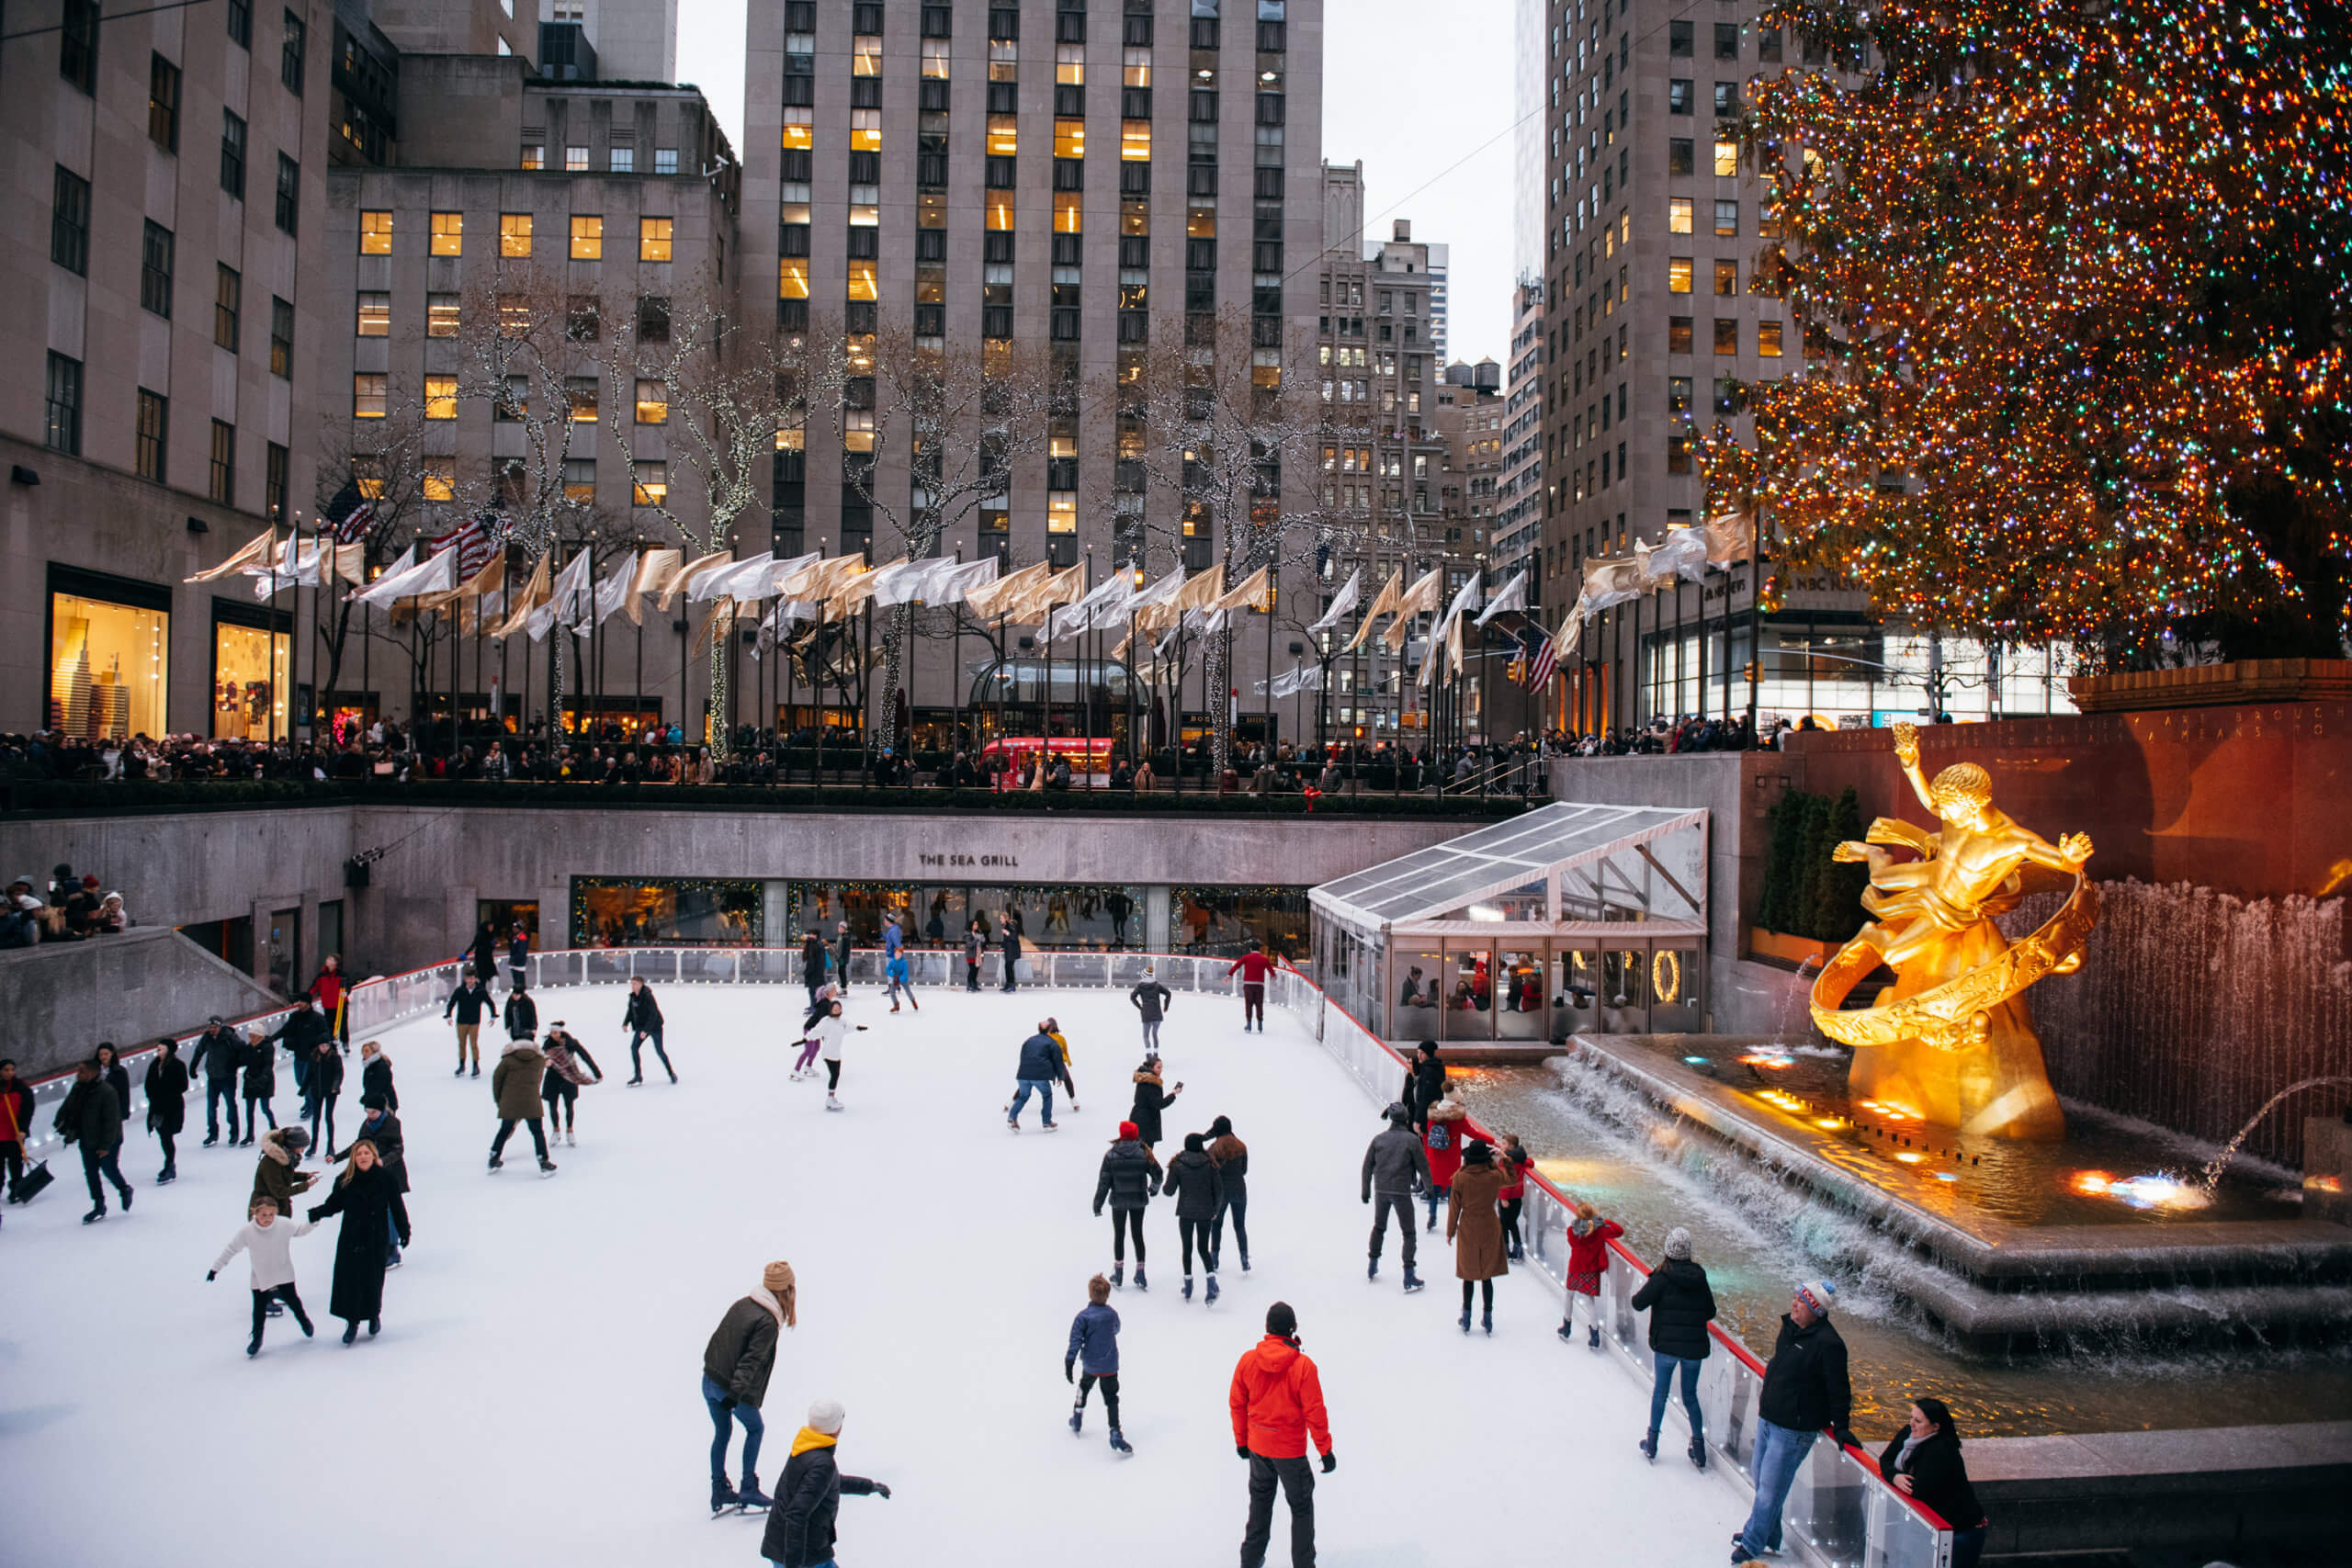 Tickets on sale ahead of the reopening of The Rink at Rockefeller Center |  amNewYork